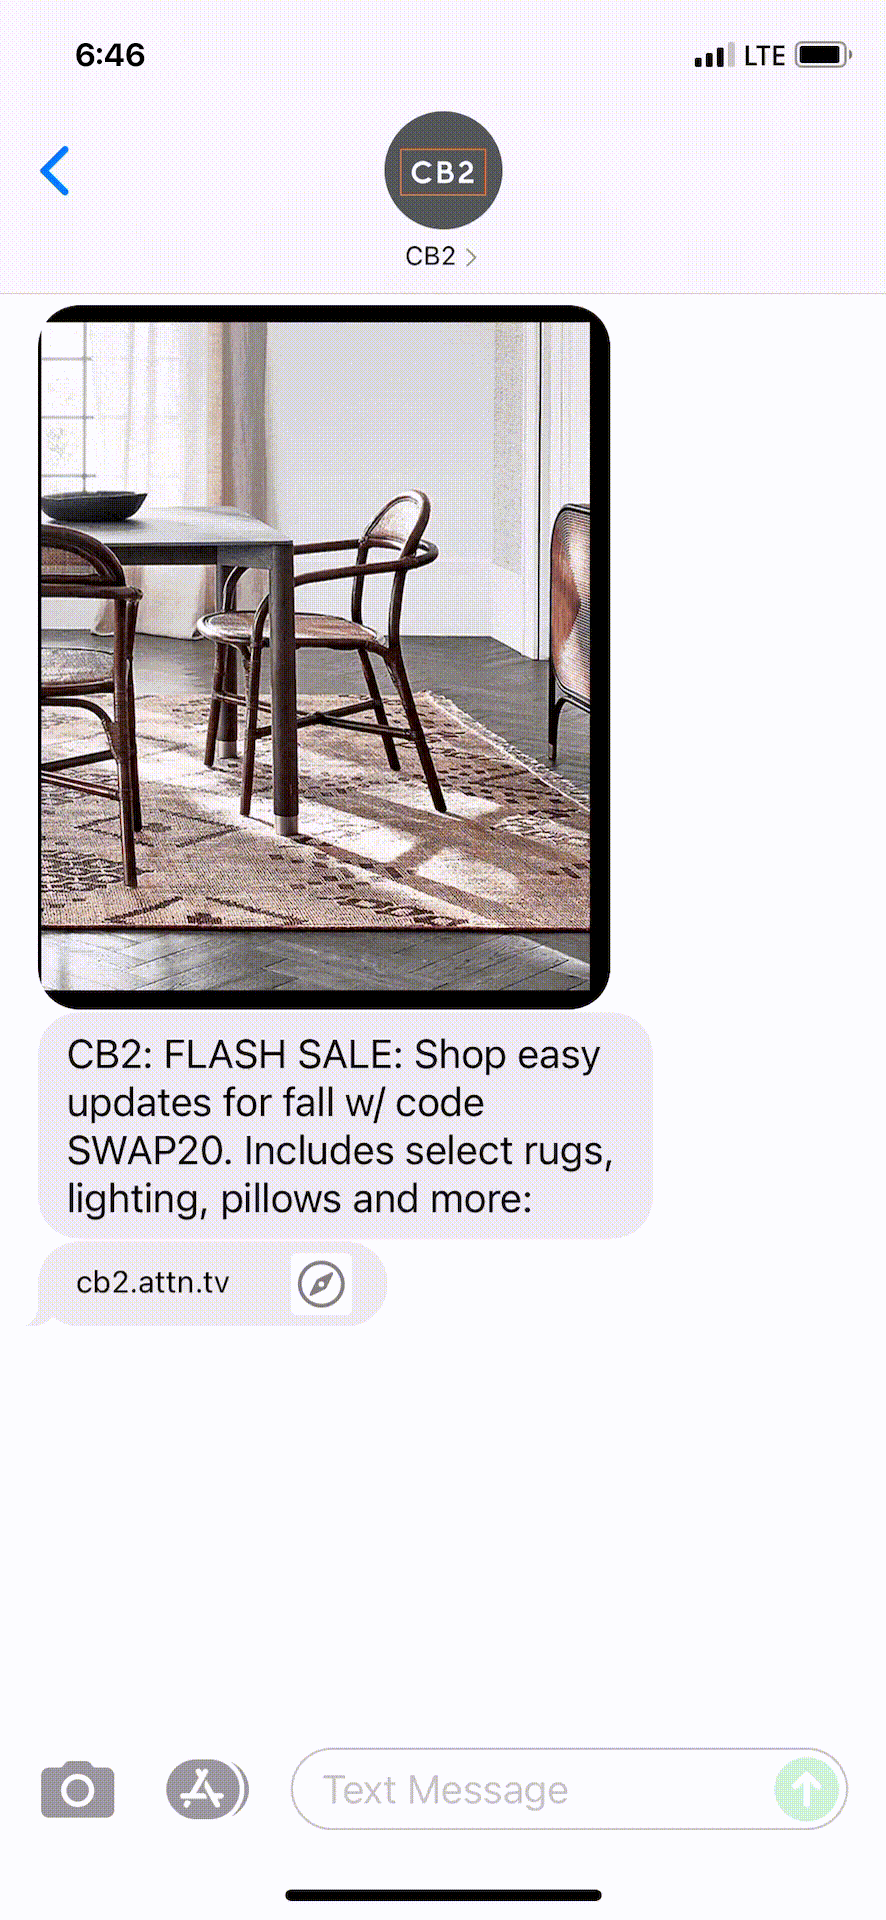 CB2-Text-Message-Marketing-Example-08.10.2021